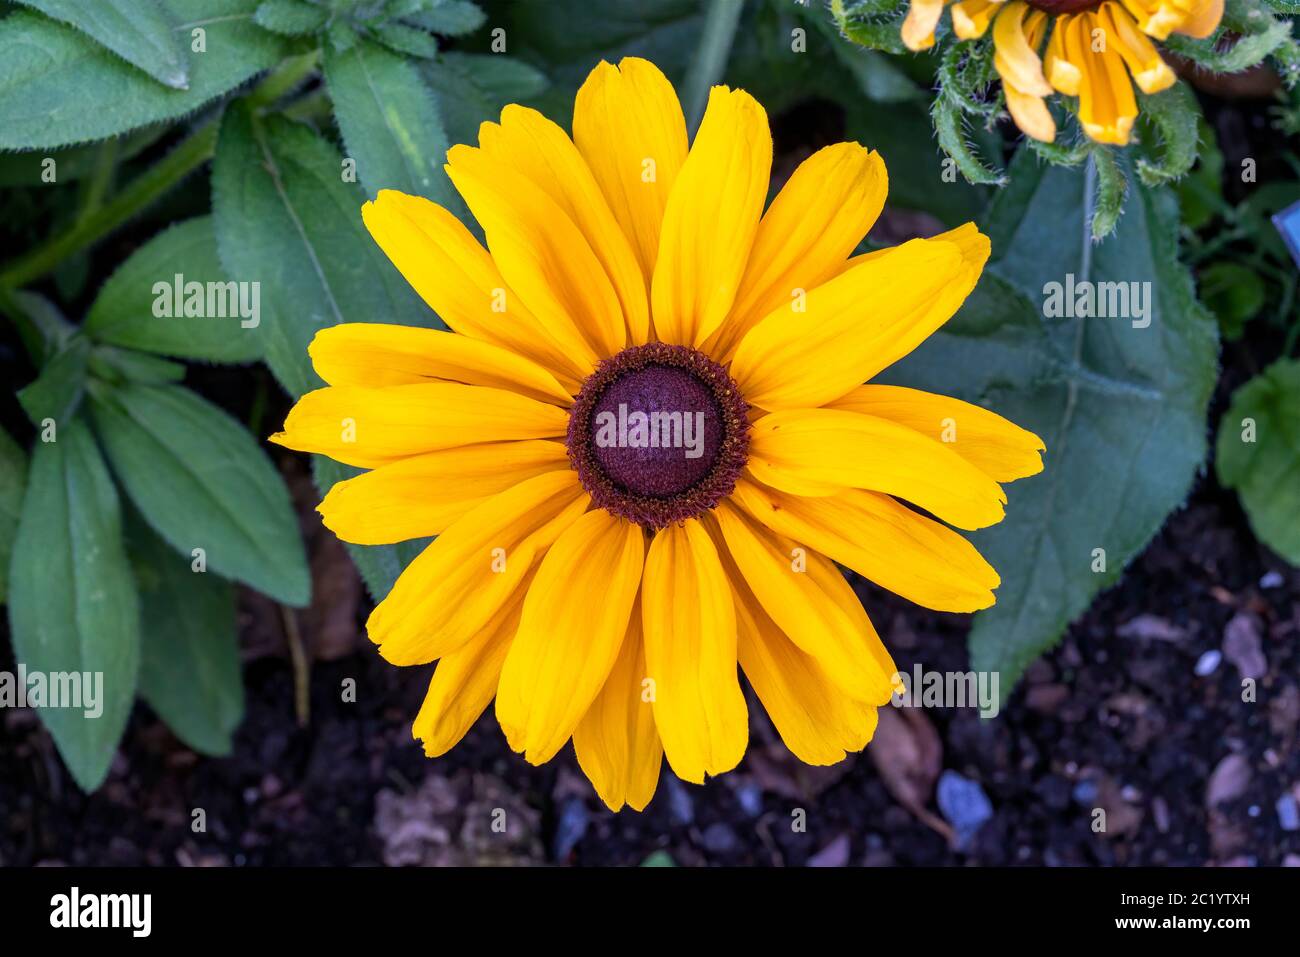 Rudbeckia hirta 'Denver Daisy' a yellow orange herbaceous perennial summer autumn flower plant commonly known as Black Eyed Susan or Coneflower stock Stock Photo